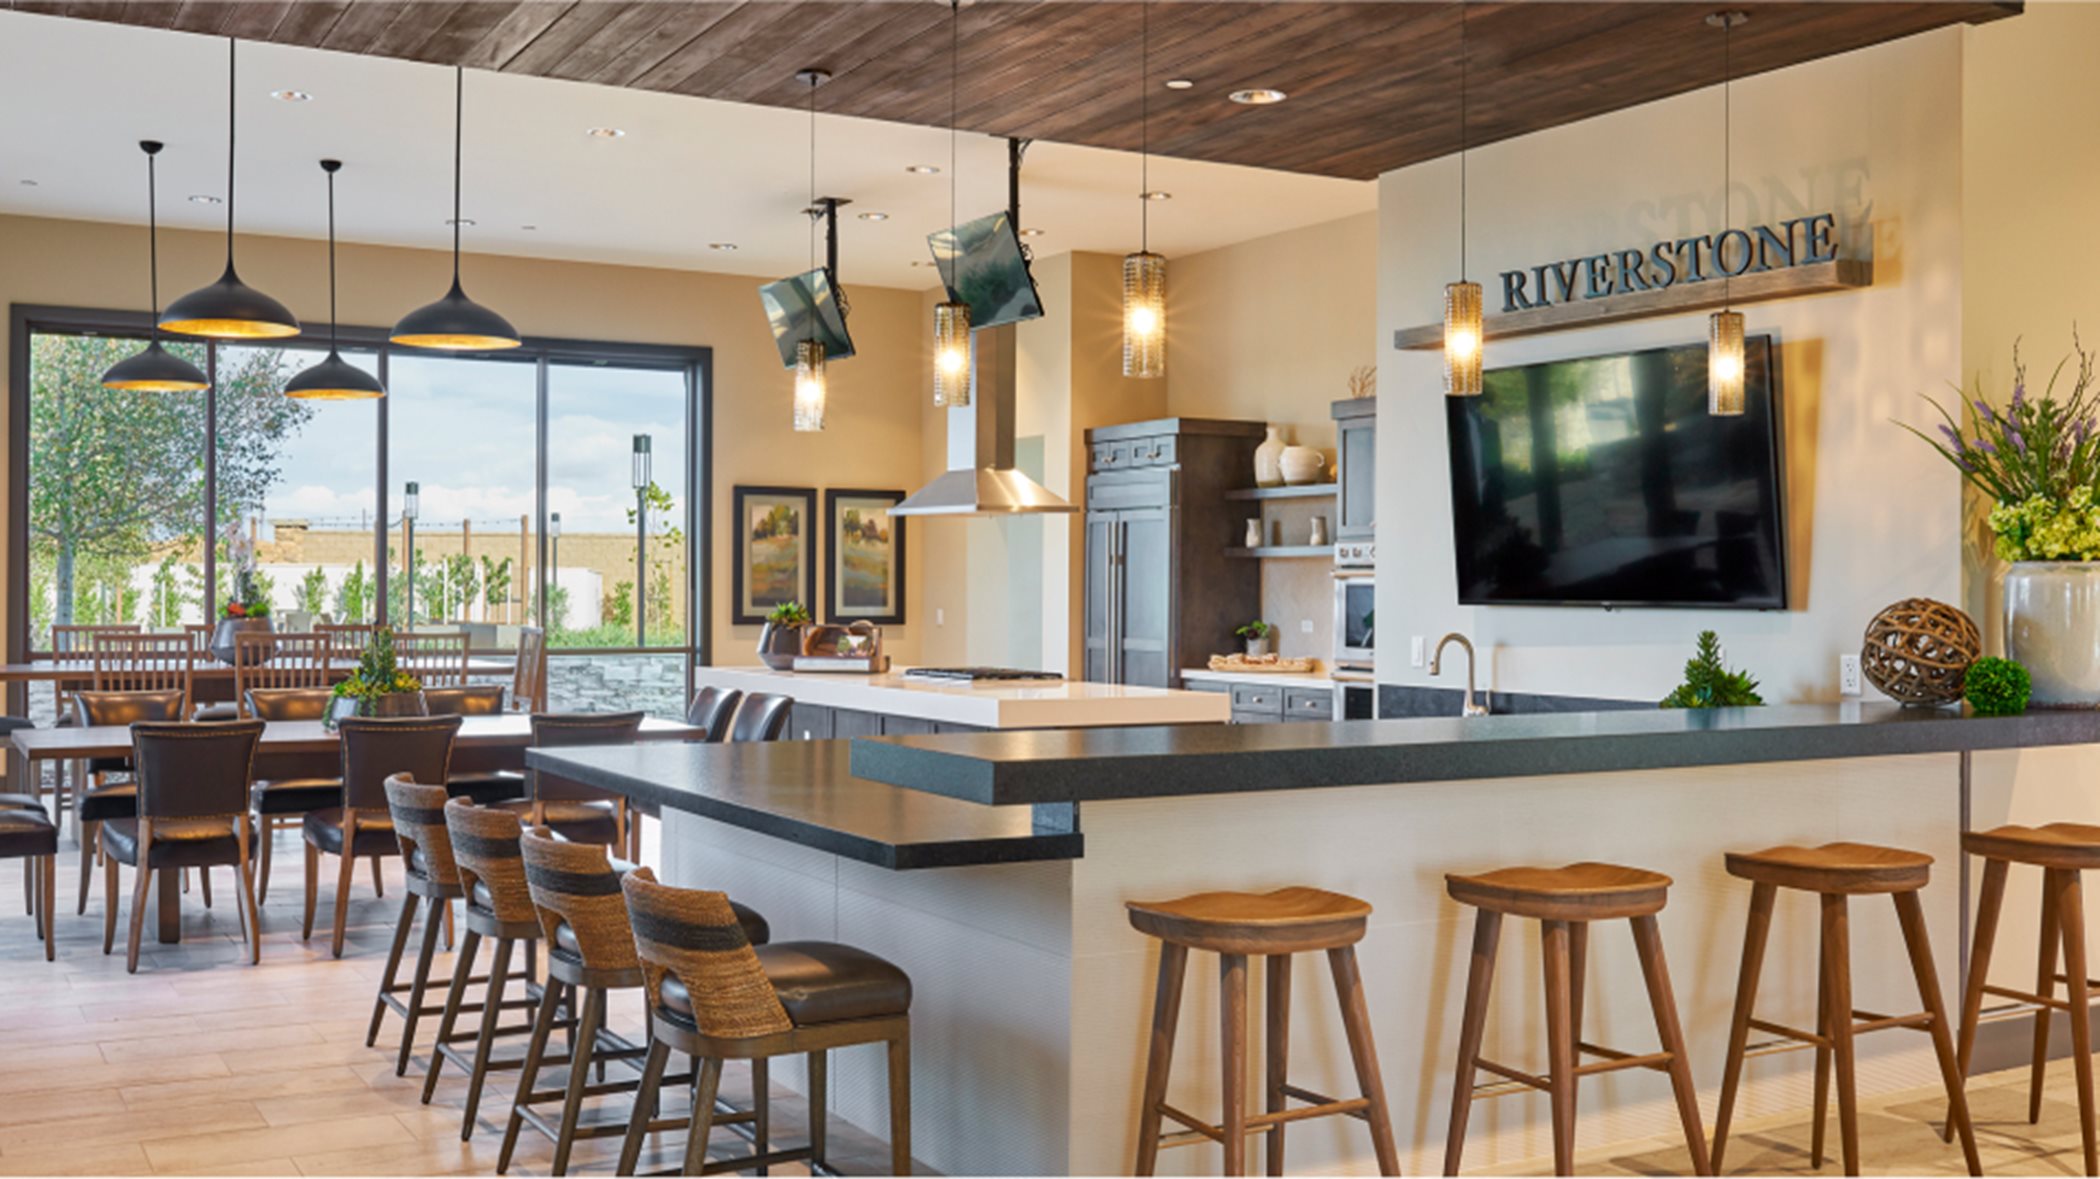 Clubhouse amenity bar and seating interior